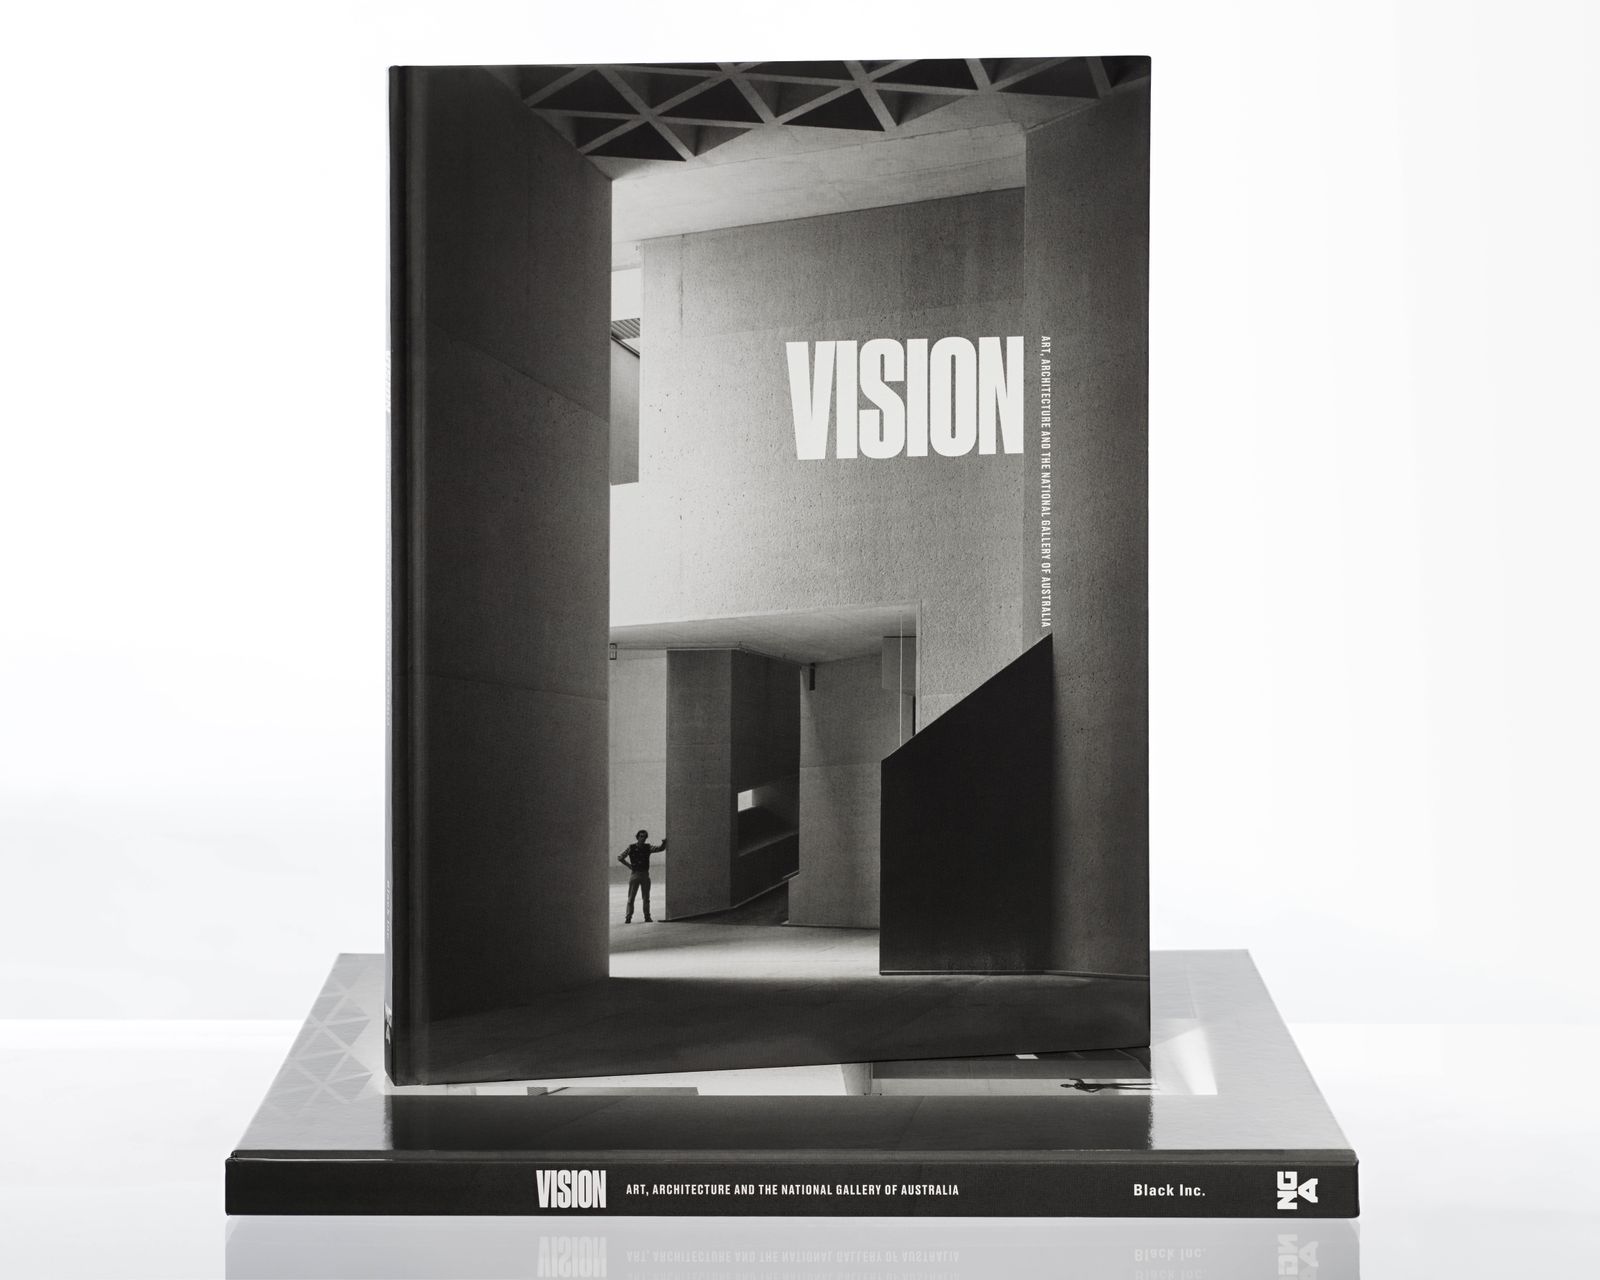 Image of a large book with a black and white photo of a building interior with the word VISION overlaid in white capital letters